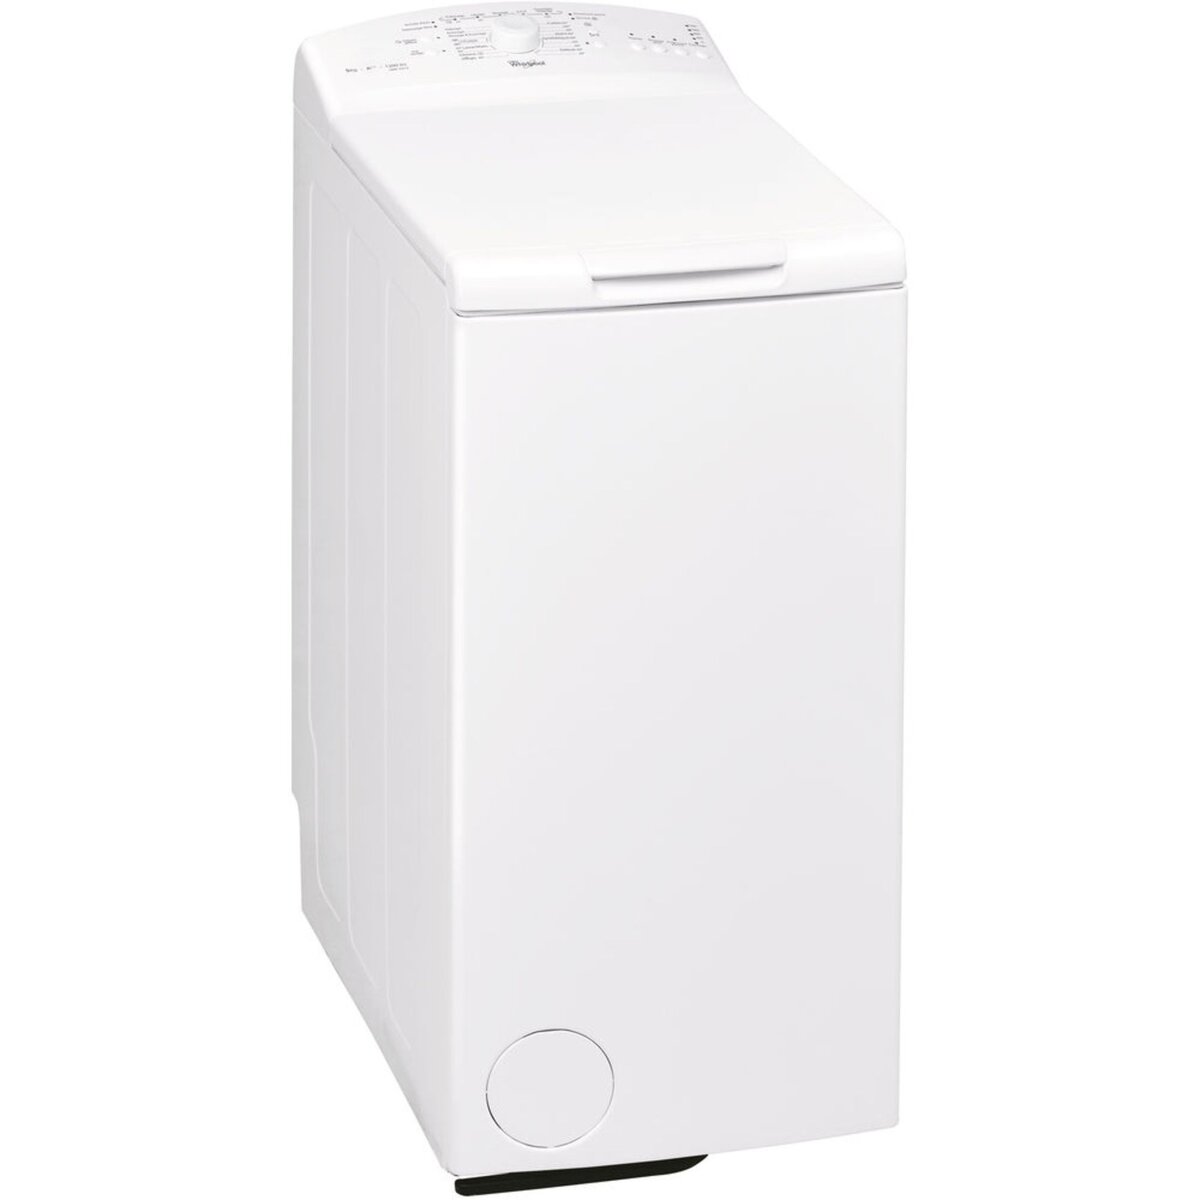 WHIRLPOOL Lave linge top AWE5213, 5 Kg, 1200 T/min pas cher 